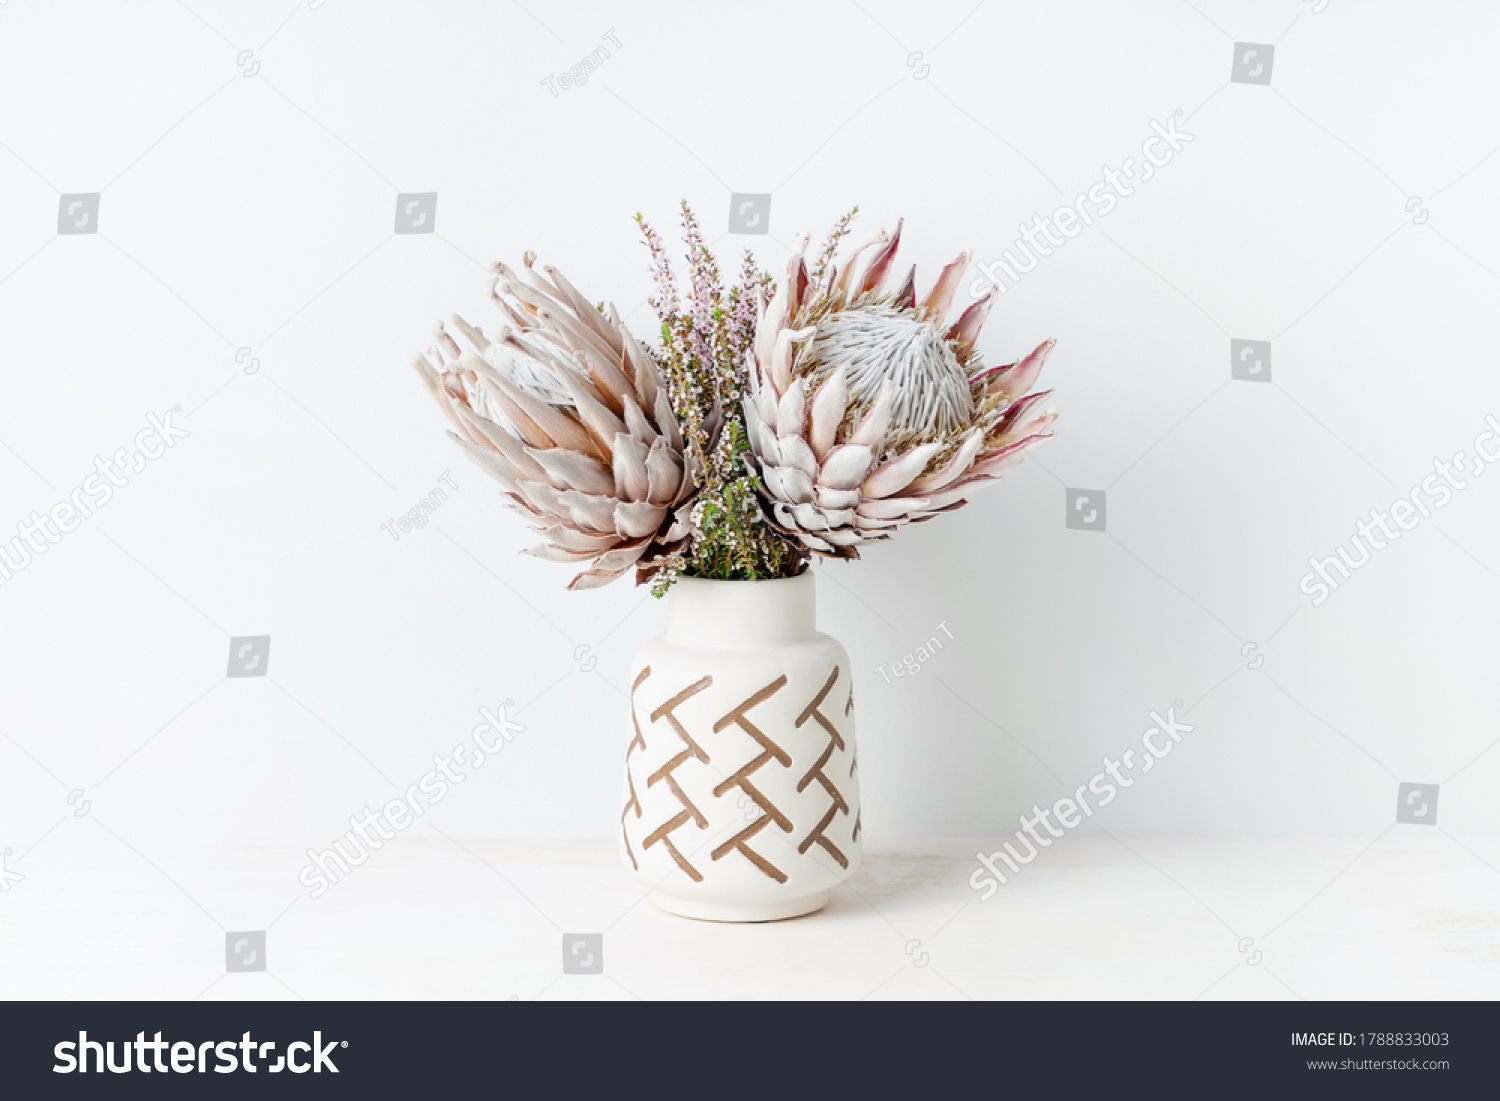 Beautiful floral arrangement including beautiful dried pink King Proteas and delicate thryptomene flowers, in a stylish aztec vase. #1788833003